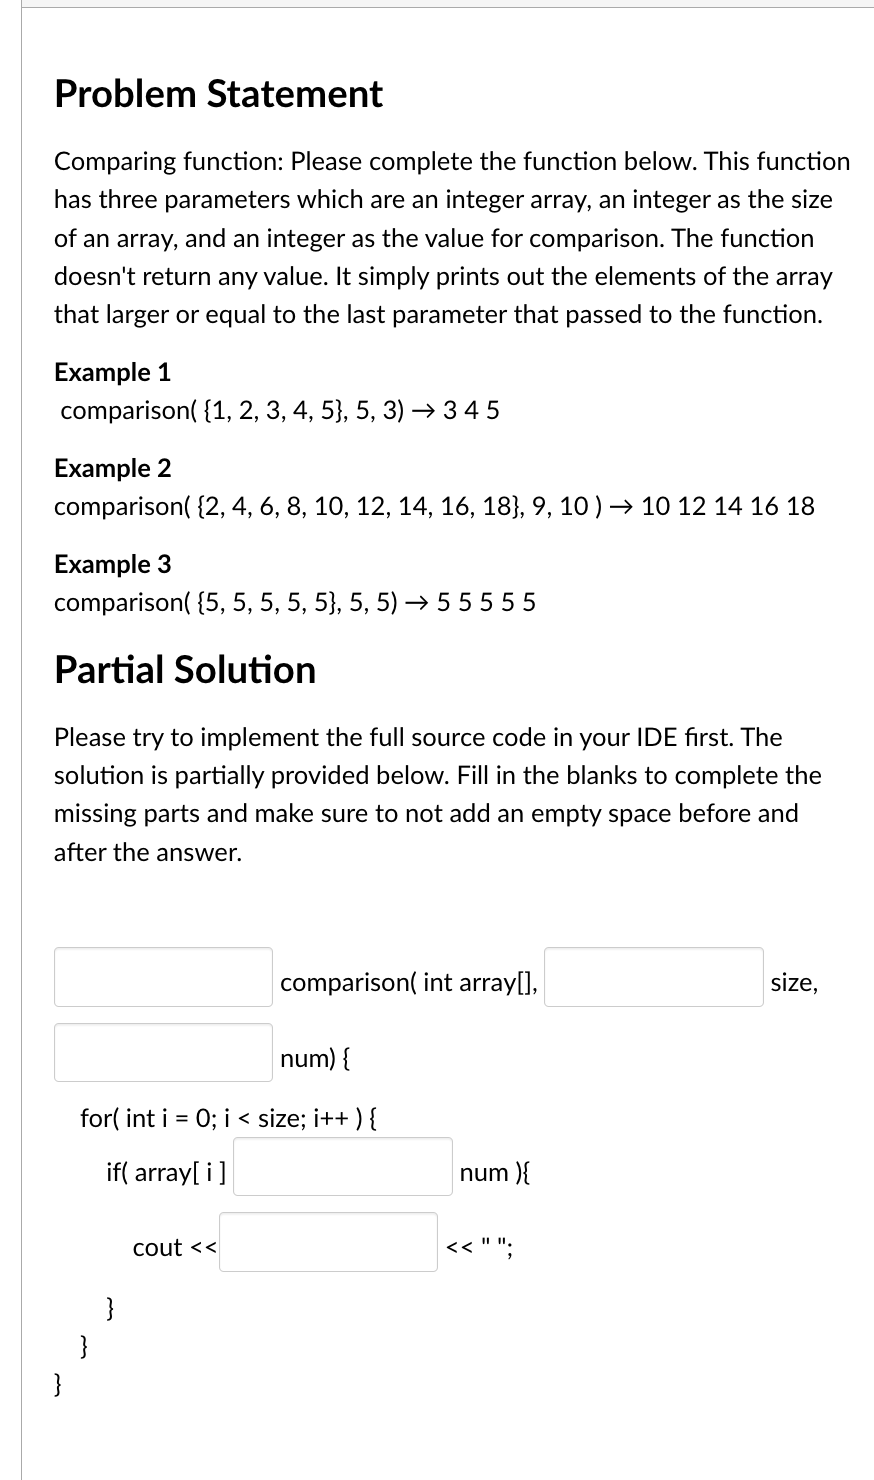 Problem Statement
Comparing function: Please complete the function below. This function
has three parameters which are an integer array, an integer as the size
of an array, and an integer as the value for comparison. The function
doesn't return any value. It simply prints out the elements of the array
that larger or equal to the last parameter that passed to the function.
Example 1
comparison({1, 2, 3, 4, 5}, 5, 3)→ 345
Example 2
comparison({2, 4, 6, 8, 10, 12, 14, 16, 18}, 9, 10 ) → 10 12 14 16 18
Example 3
comparison({5, 5, 5, 5, 5}, 5, 5)→ 55555
Partial Solution
Please try to implement the full source code in your IDE first. The
solution is partially provided below. Fill in the blanks to complete the
missing parts and make sure to not add an empty space before and
after the answer.
}
num) {
for(int i = 0; i < size; i++) {
if(array[i]
}
}
comparison(int array[],
cout <<
num){
<< " ";
size,